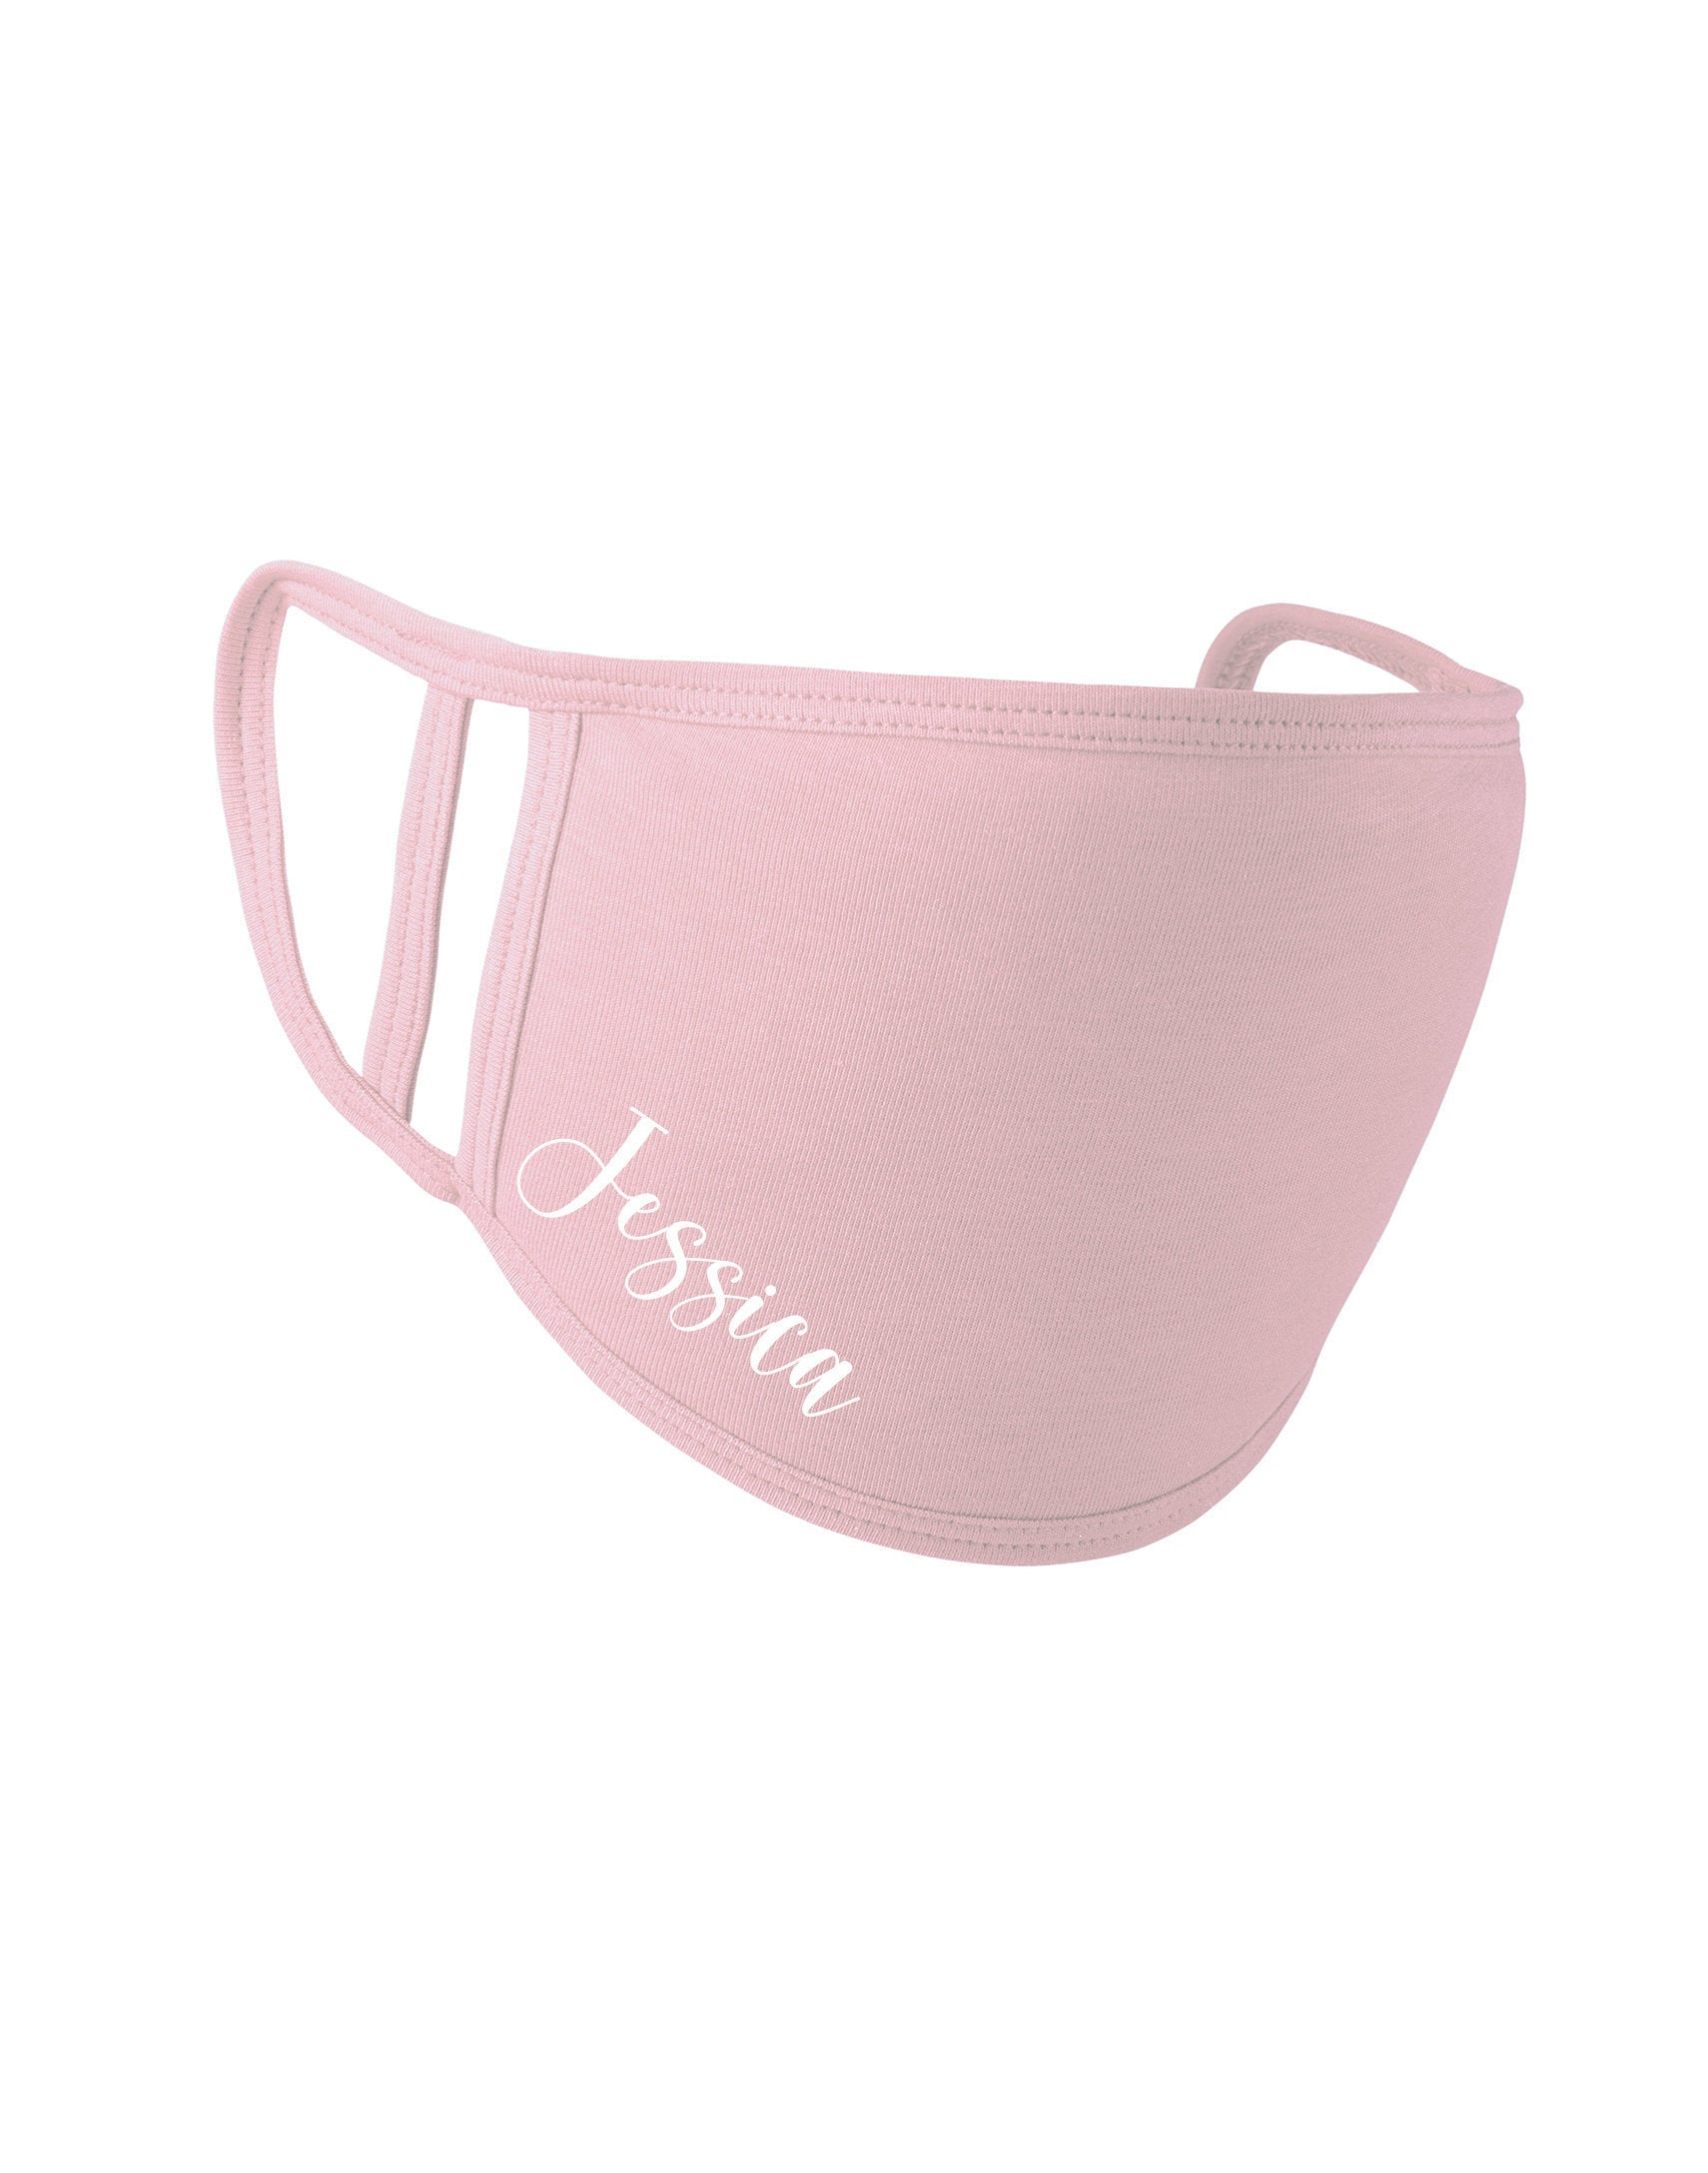 Personalised Name Face Mask